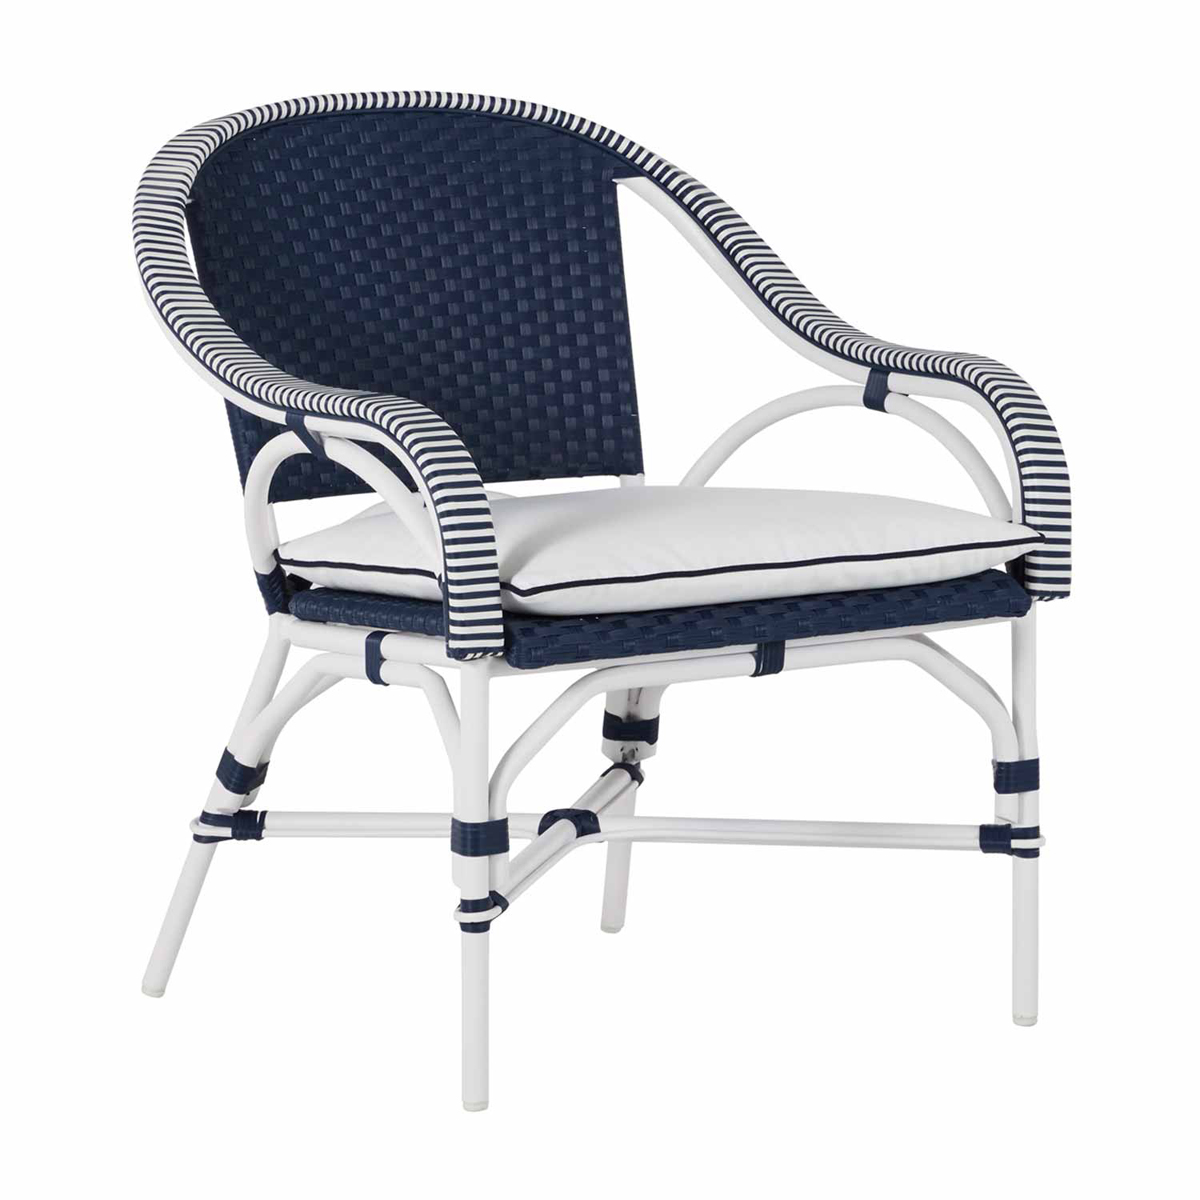 savoy lounge chair product image